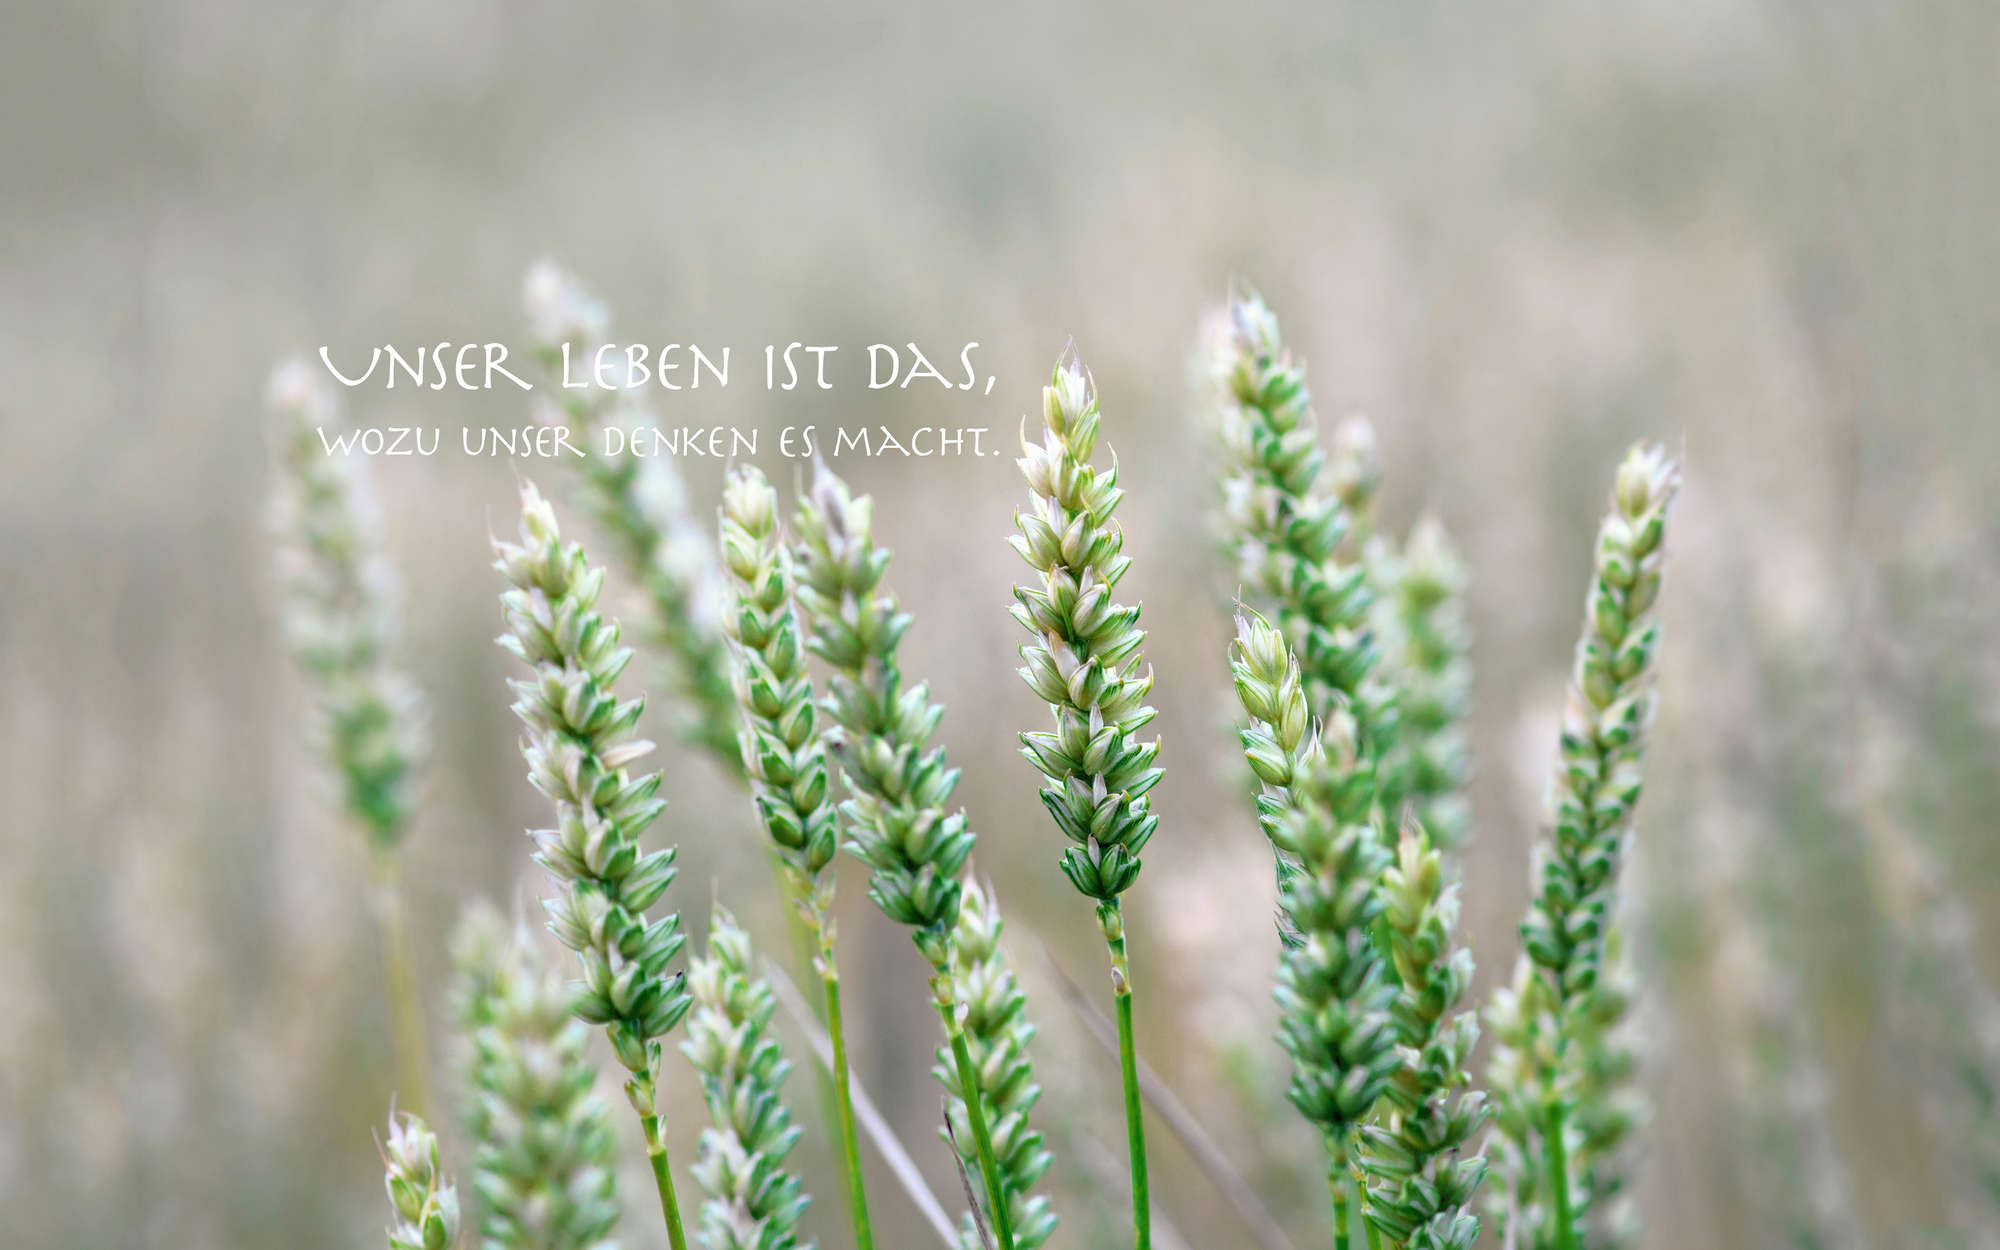             Photo wallpaper detail of wheat with lettering - mother-of-pearl smooth non-woven
        